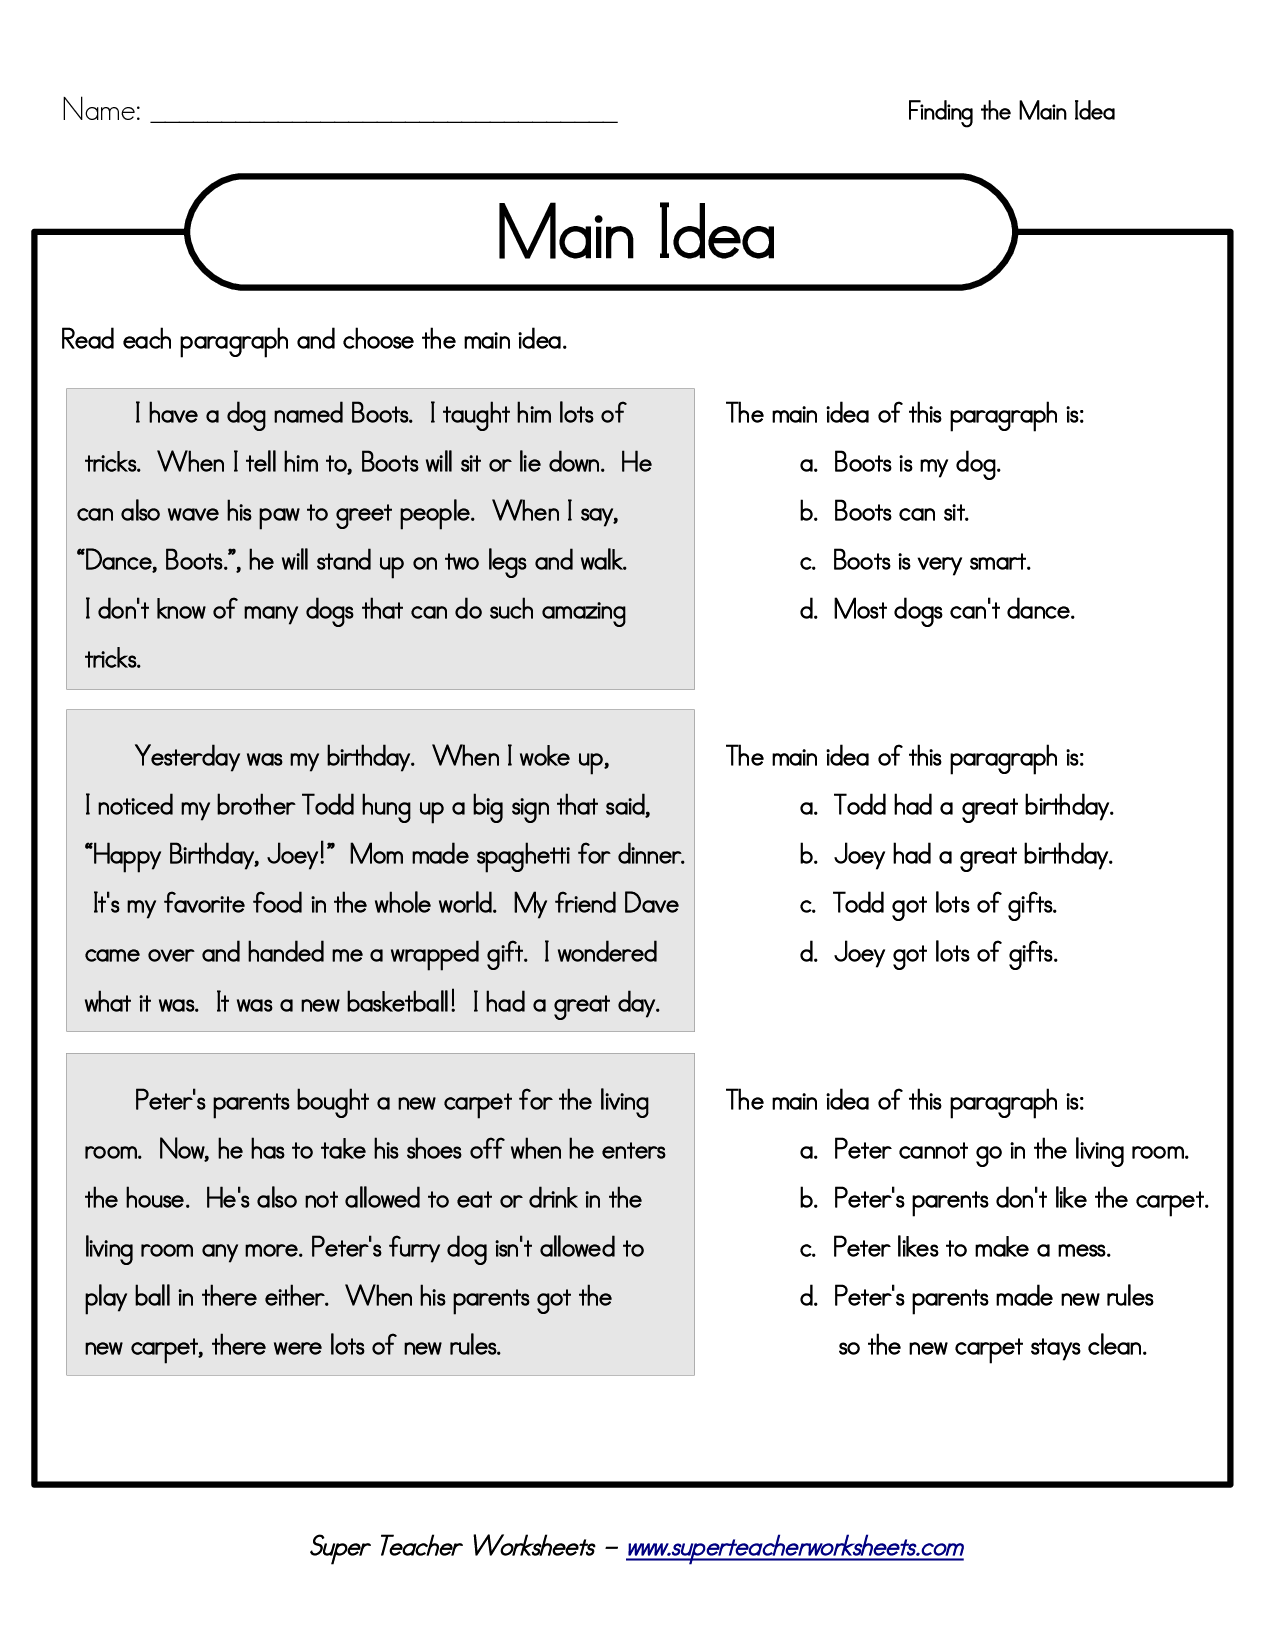 15-best-images-of-main-idea-supporting-detail-worksheets-main-idea